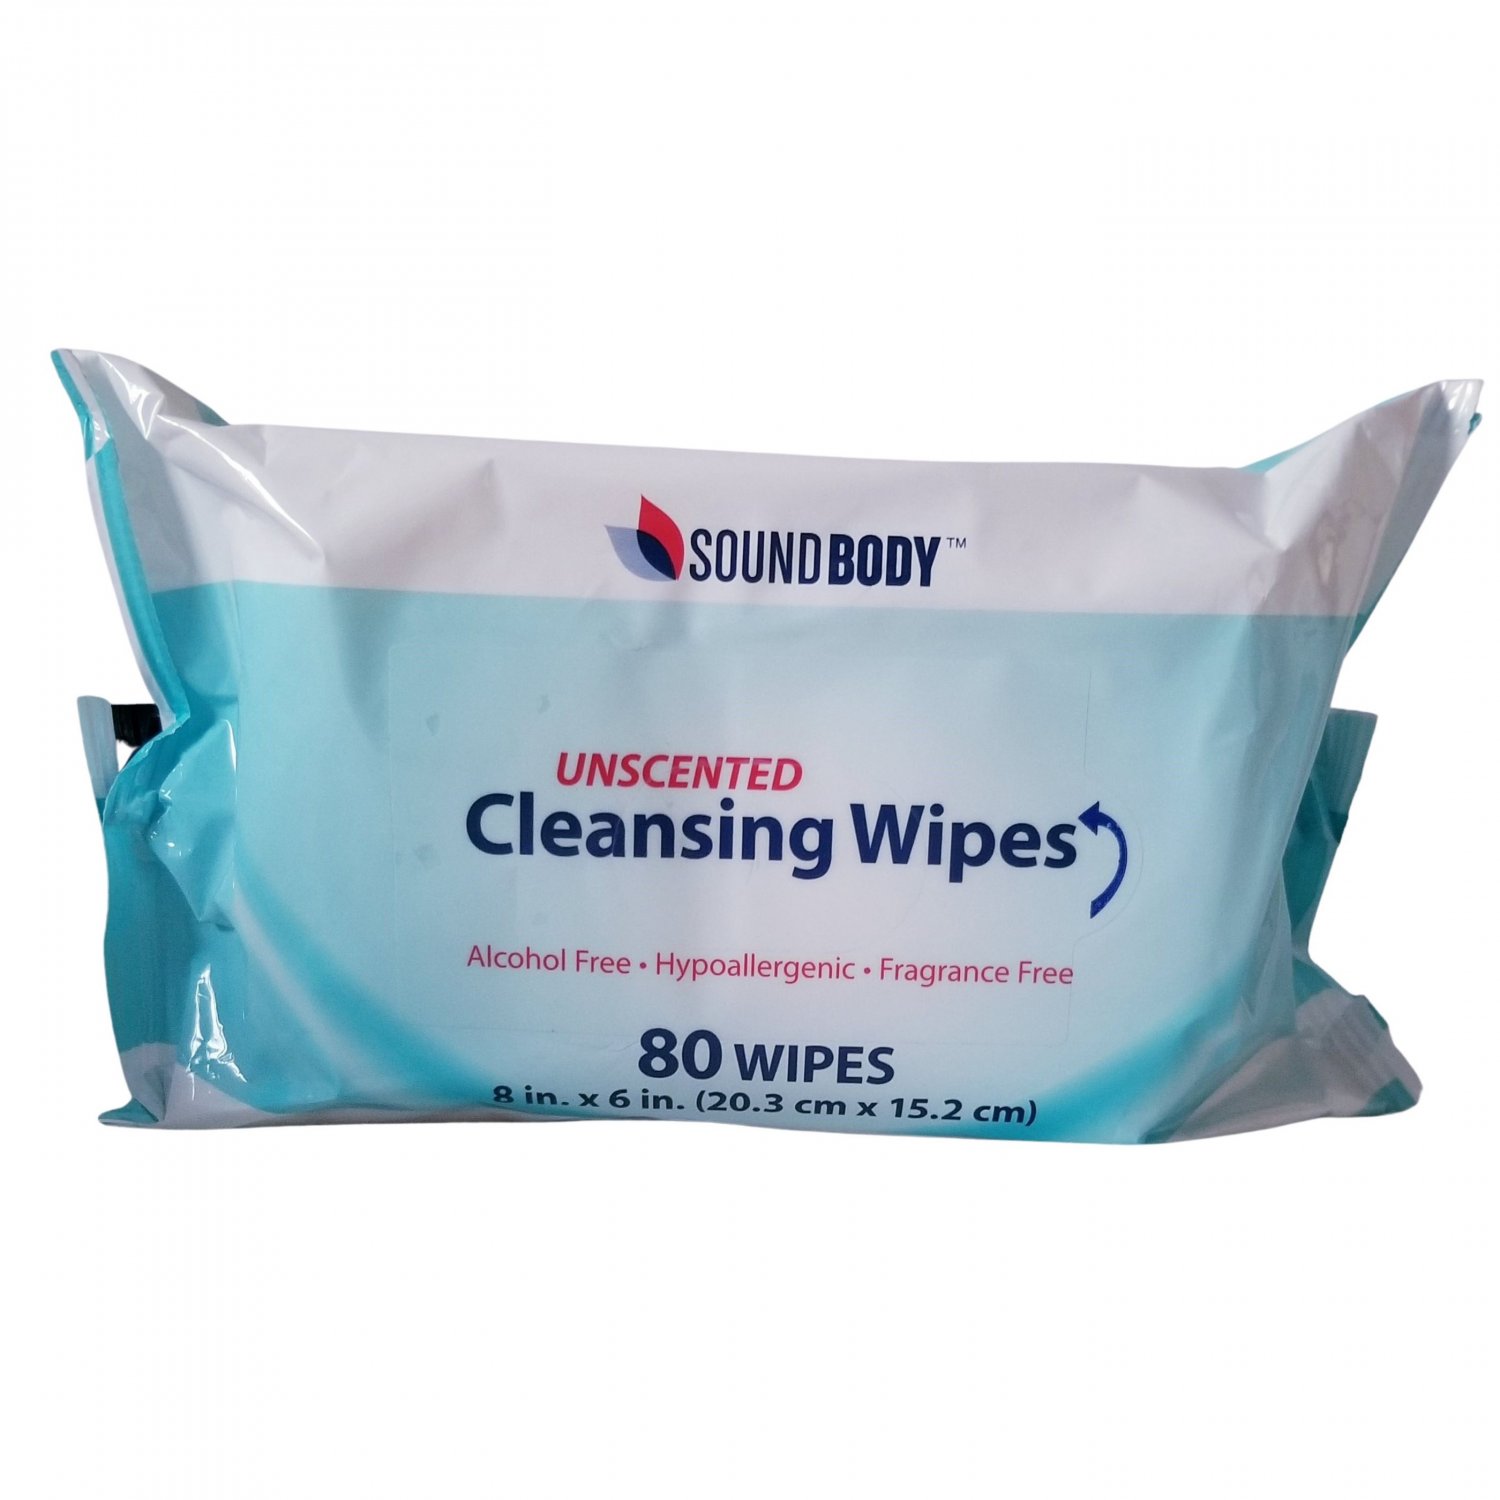 Sound Body Unscented Cleansing Wipes, 80 ct